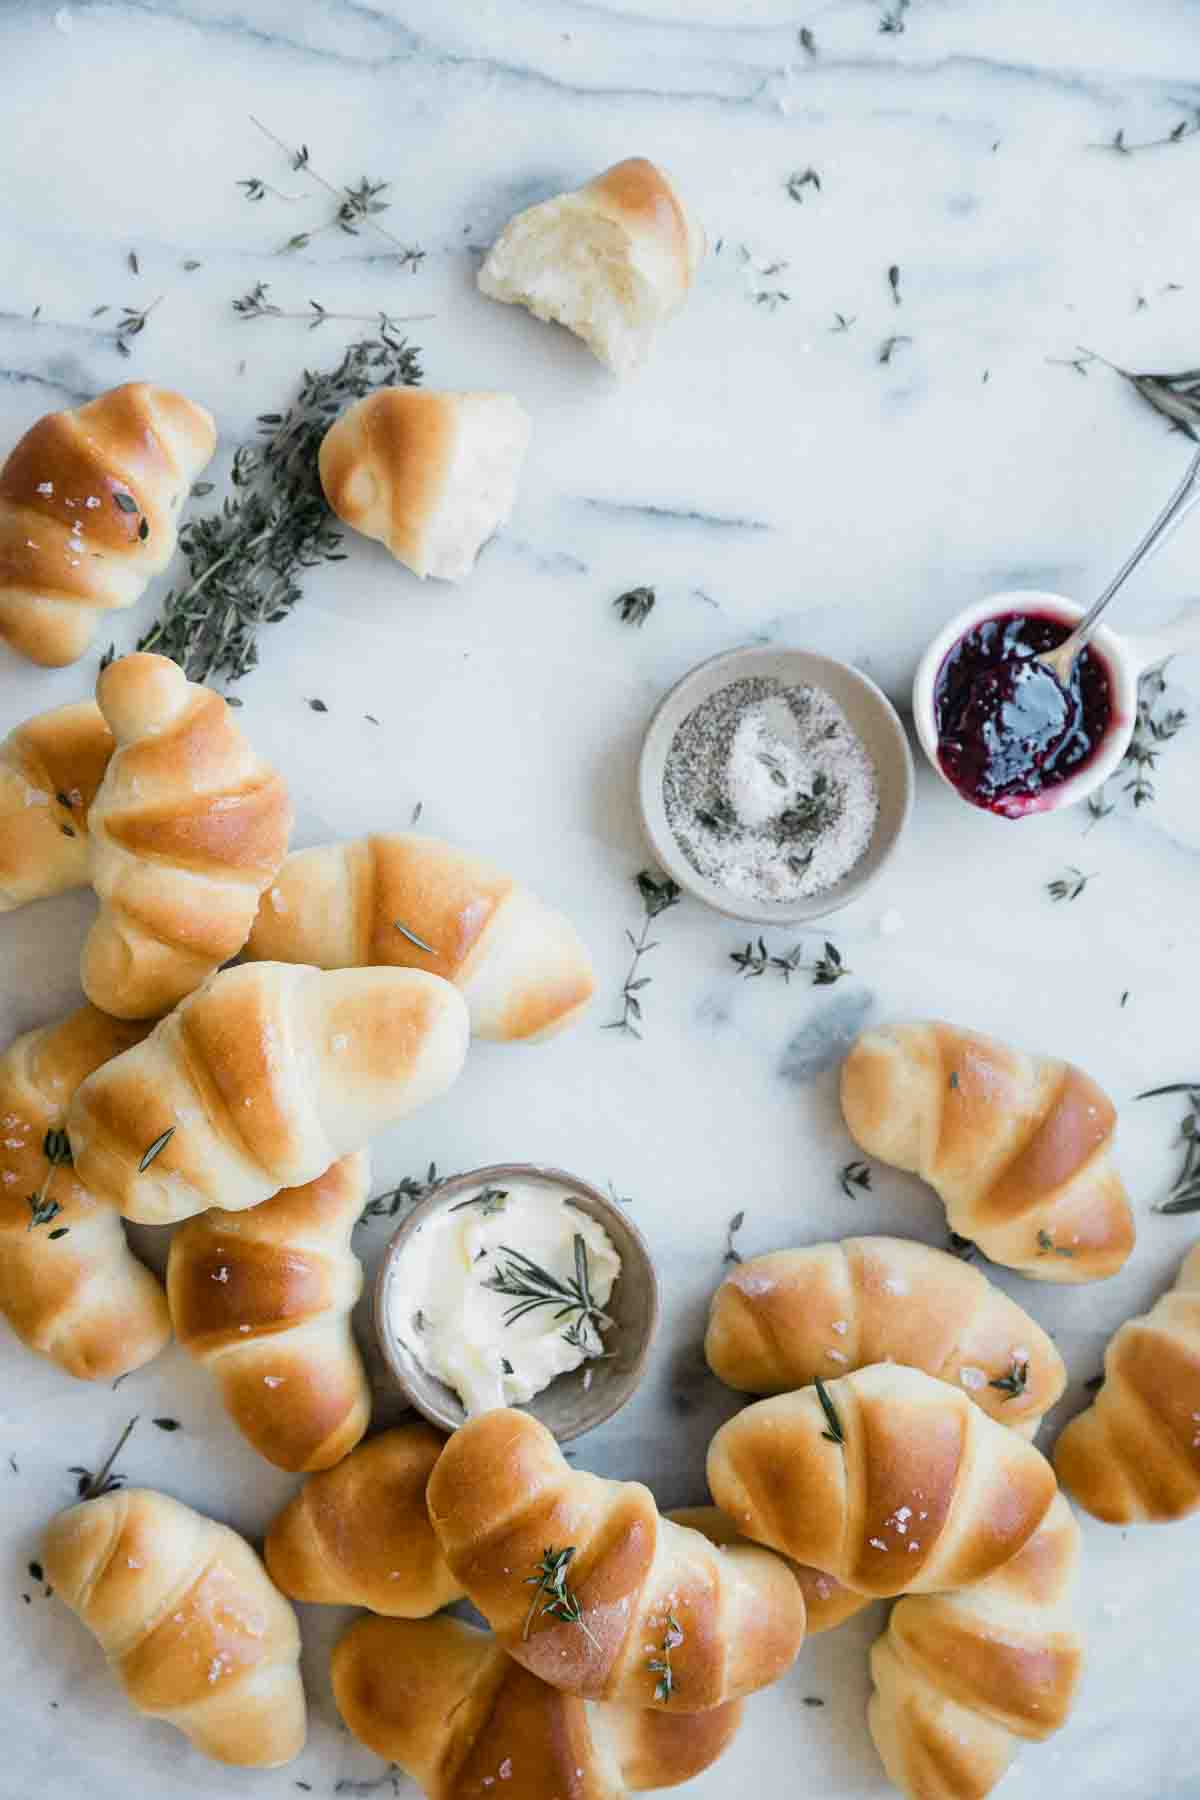 Crescent rolls scattered on a marble counter. There are small bowls of butter, jam, and salt and pepper to the side.